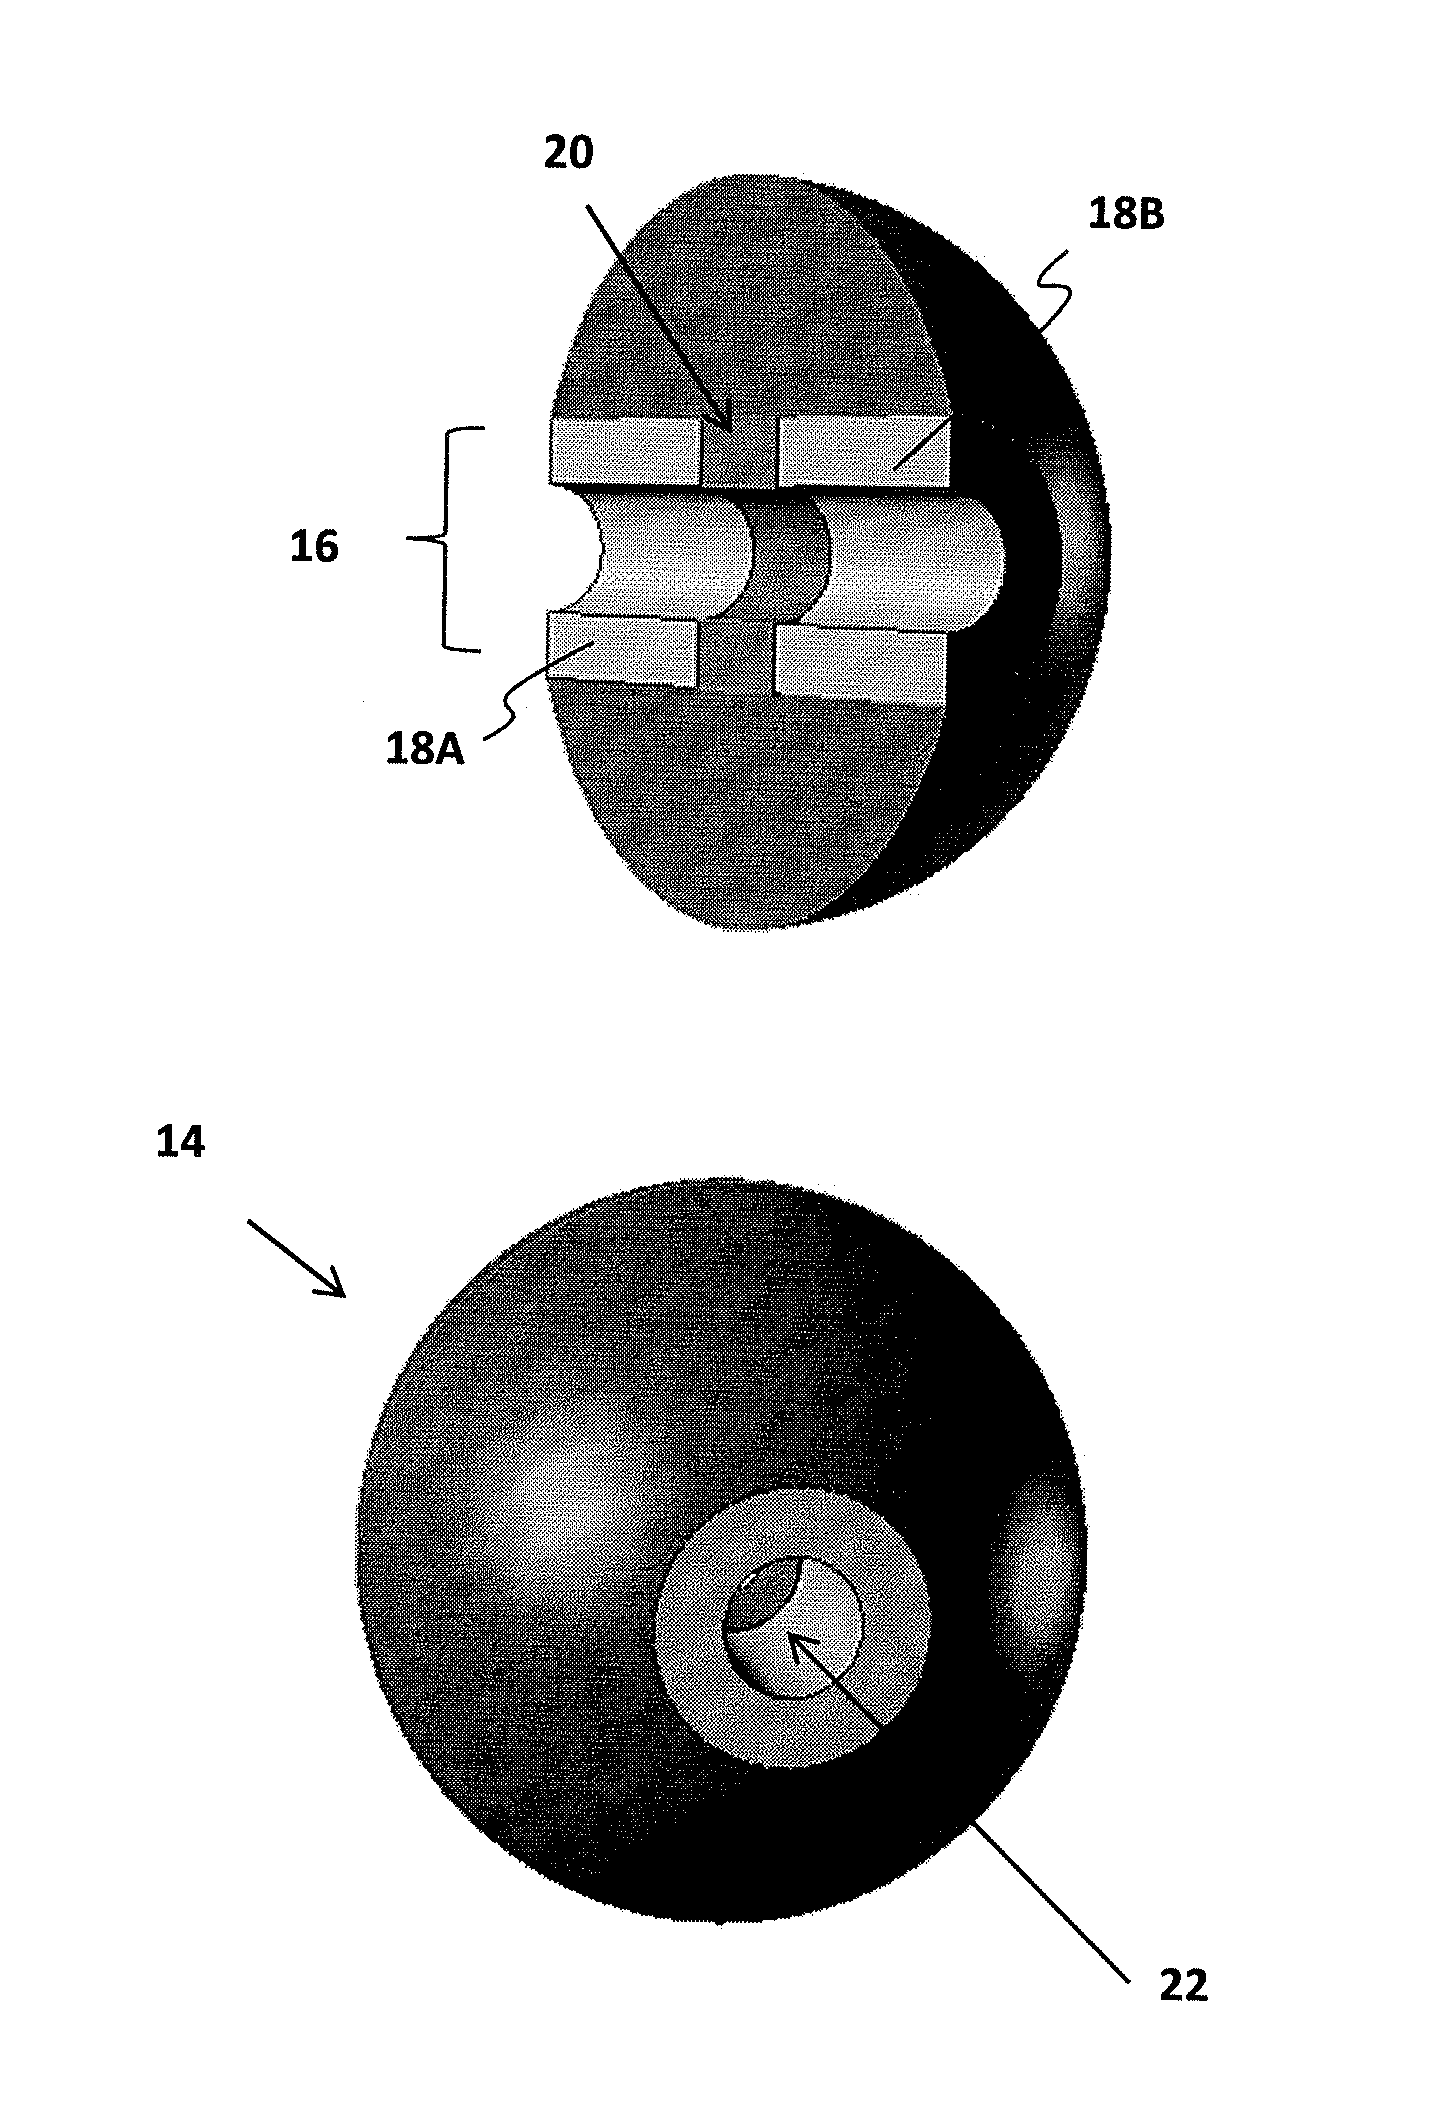 Article of jewelry having repulsive magnetic elements and methods of manufacturing